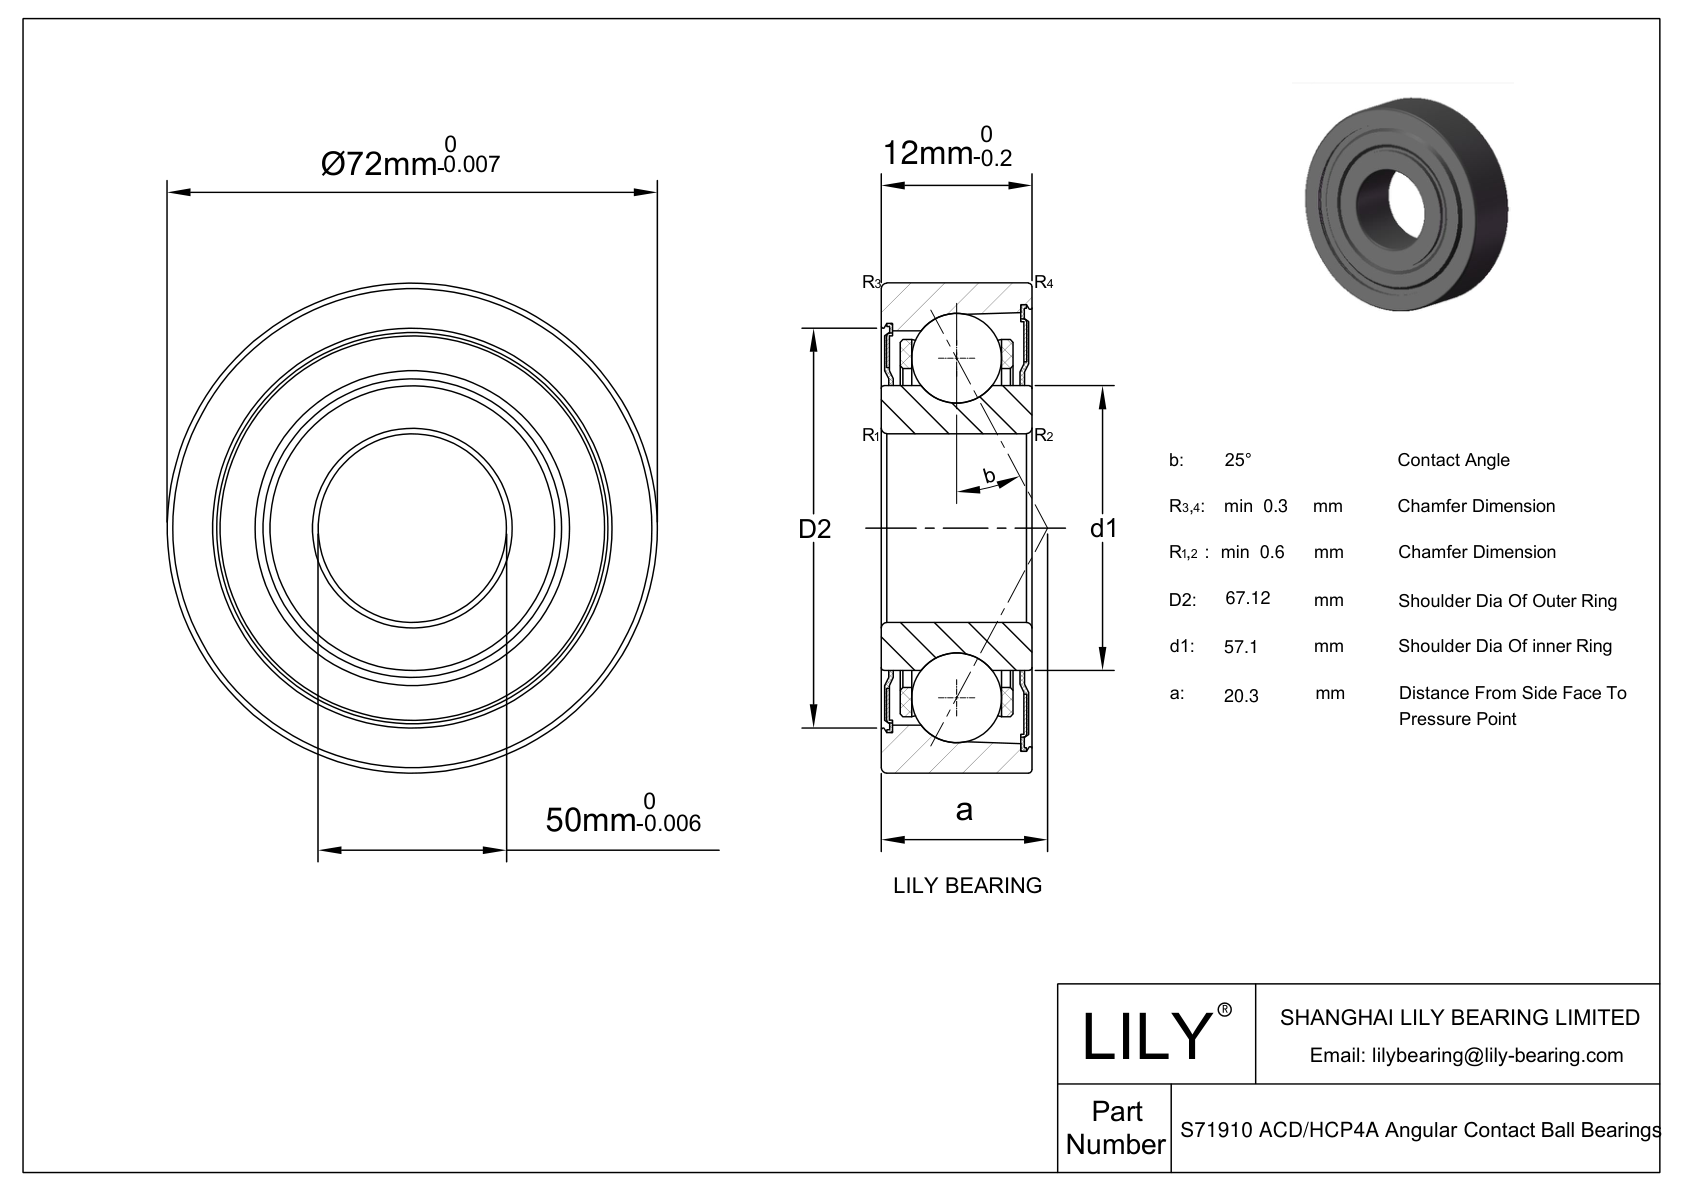 S71910 ACD/HCP4A Super Precision Angular Contact Ball Bearings cad drawing